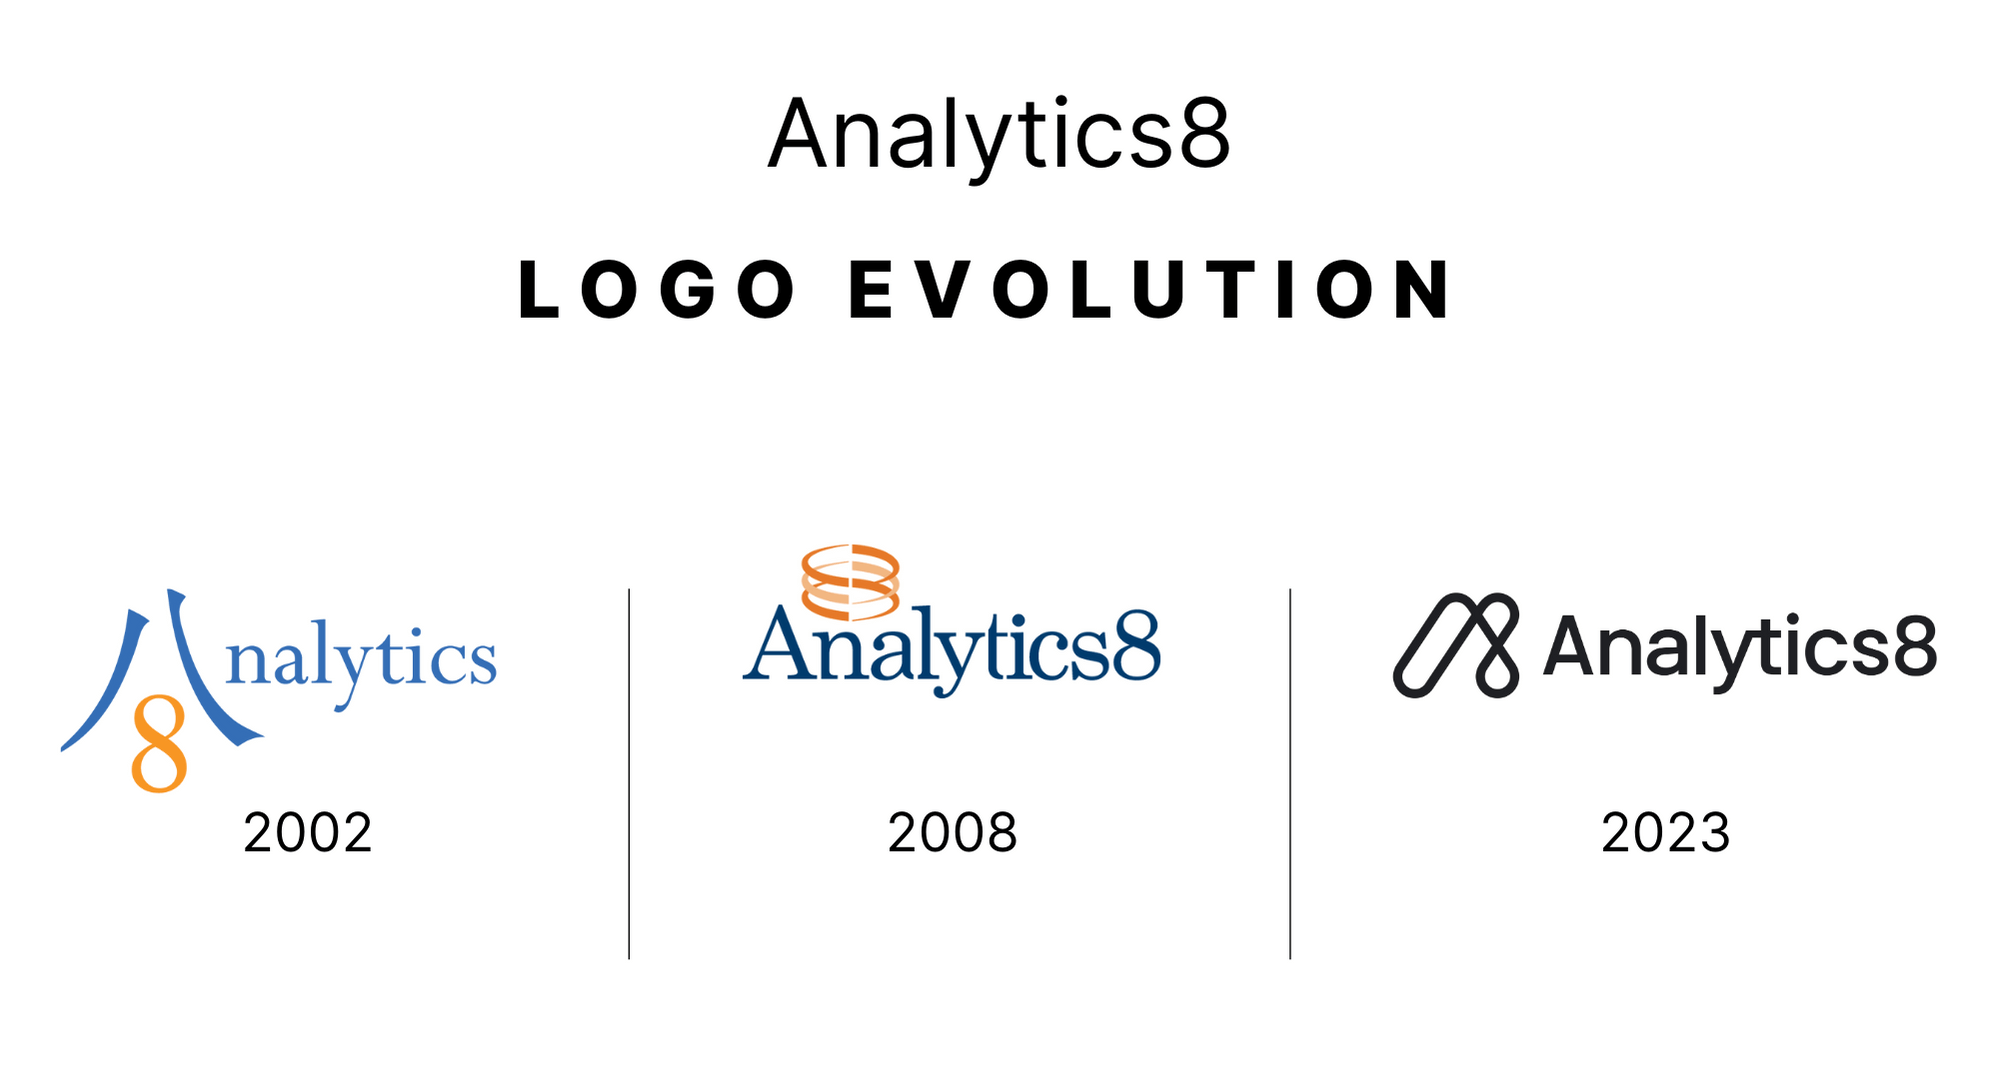 Three logos aligned left to right represent Analytics8's logo evolution from 2002 to 2023. 